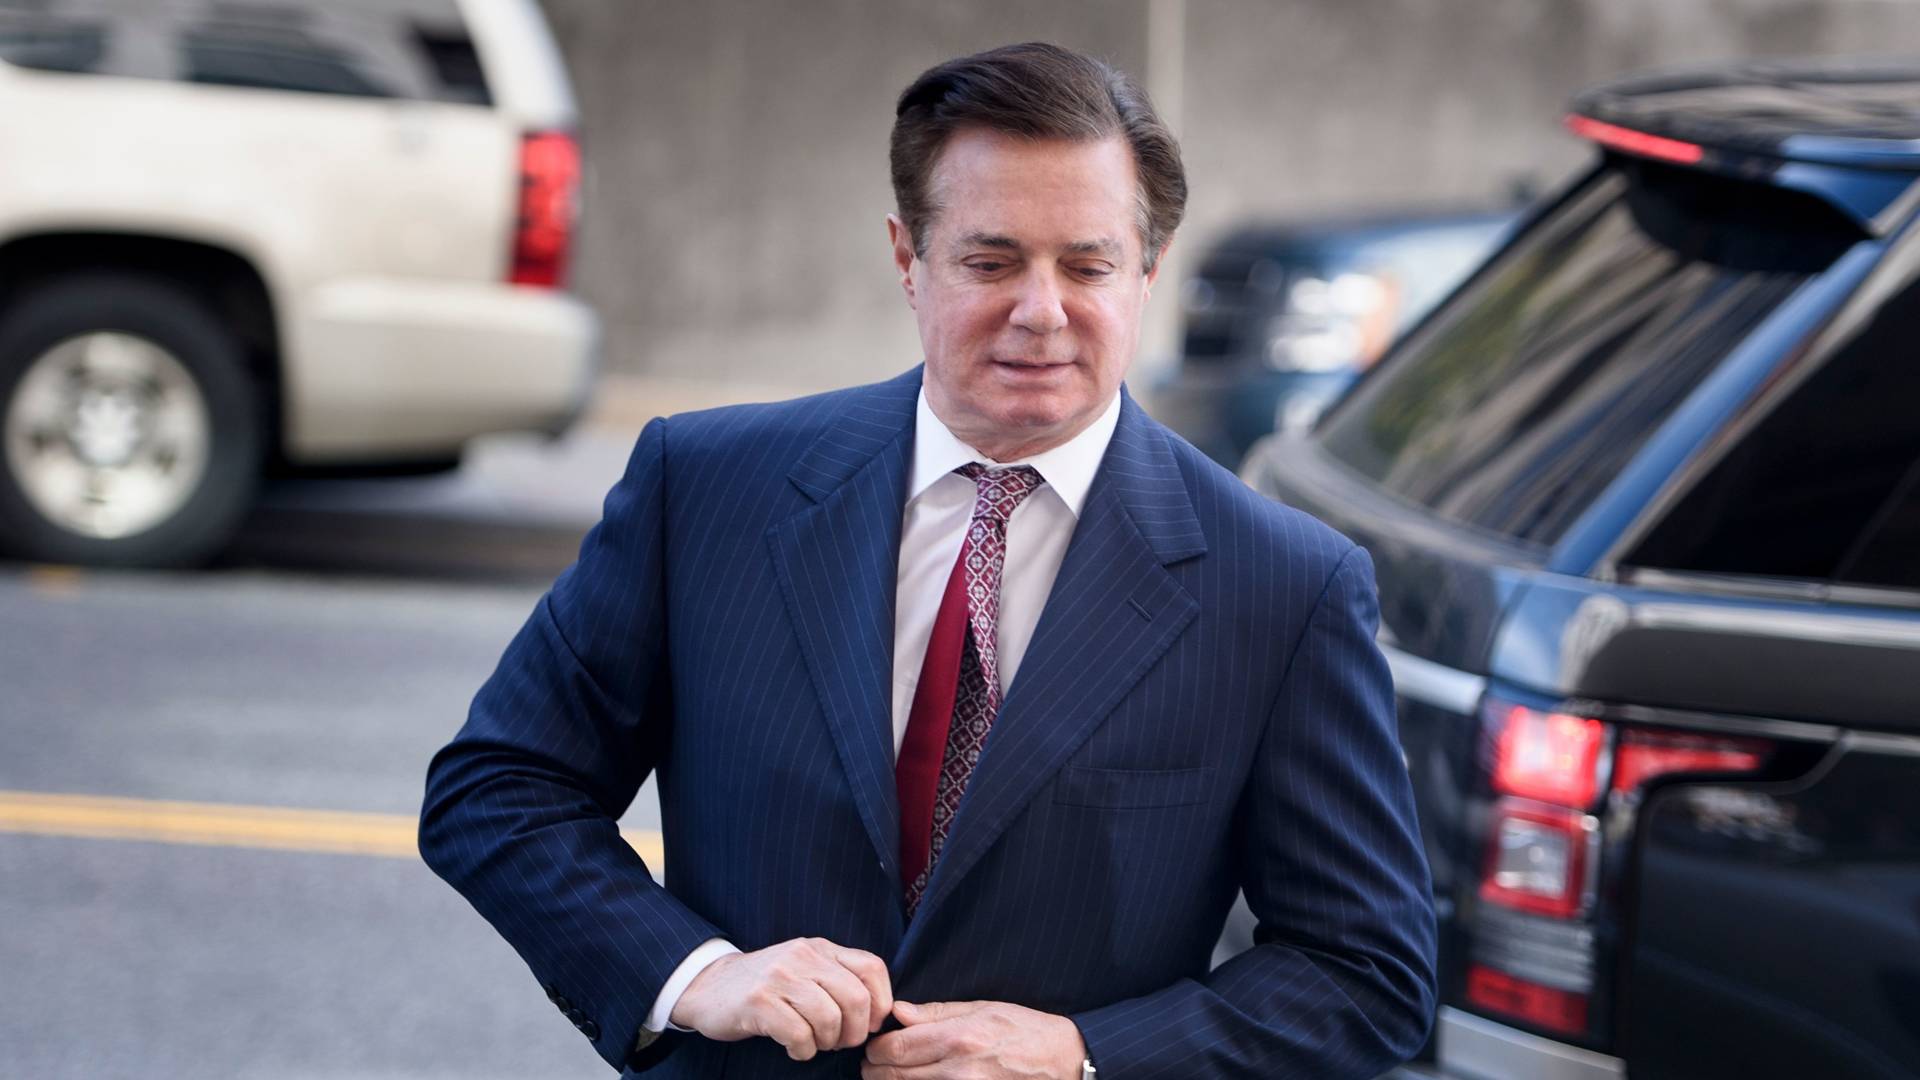 A latest superseding criminal information released on Friday distilled the charges against Paul Manafort down to two — conspiracy against the United States and conspiracy to obstruct justice. Brendan Smialowski/AFP/Getty Images